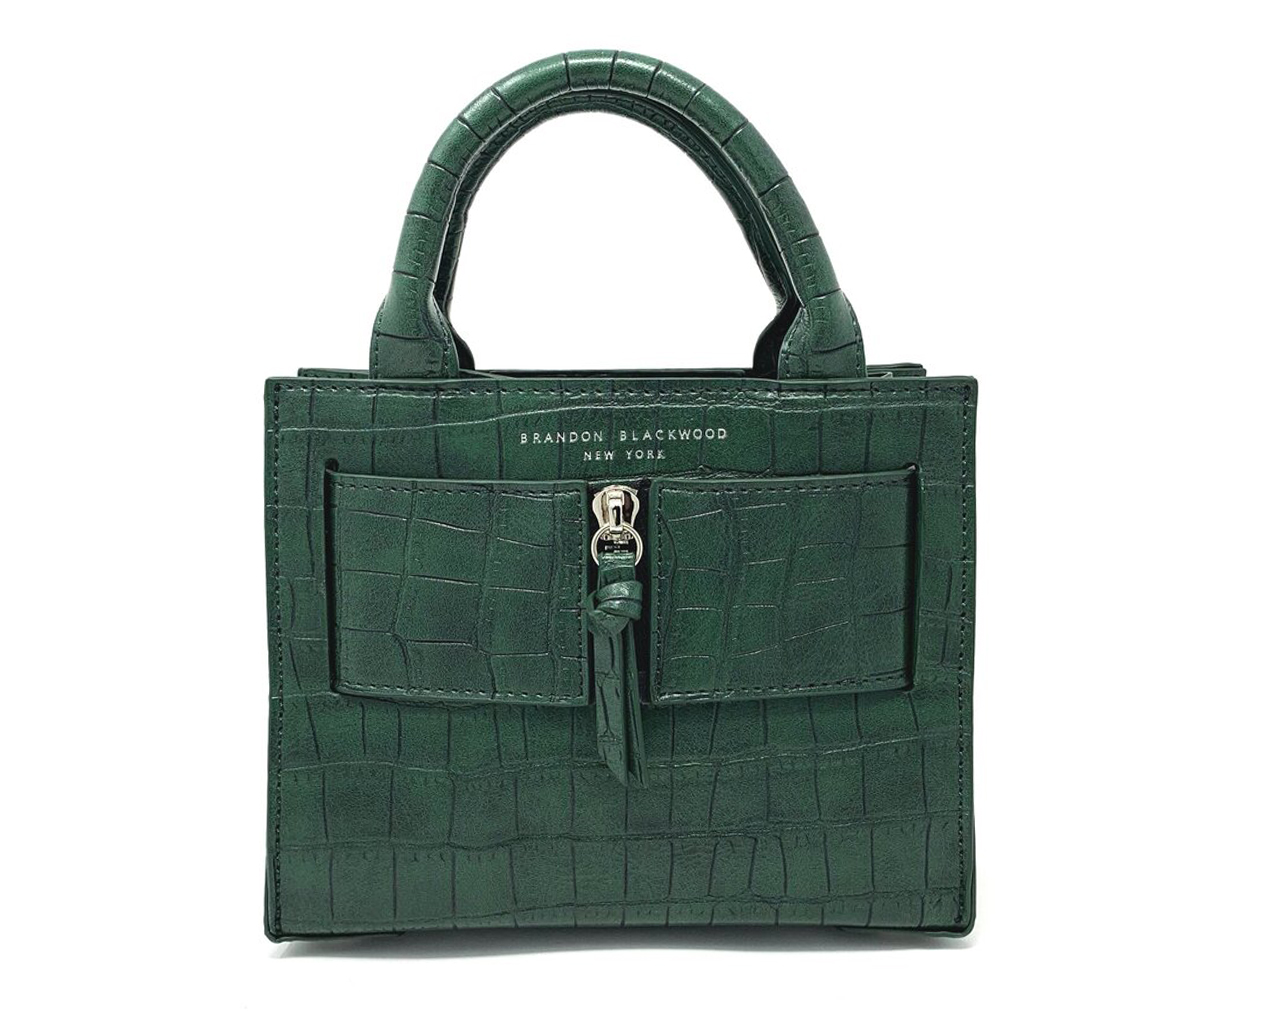 KUEI BAG IN FOREST GREEN CROC